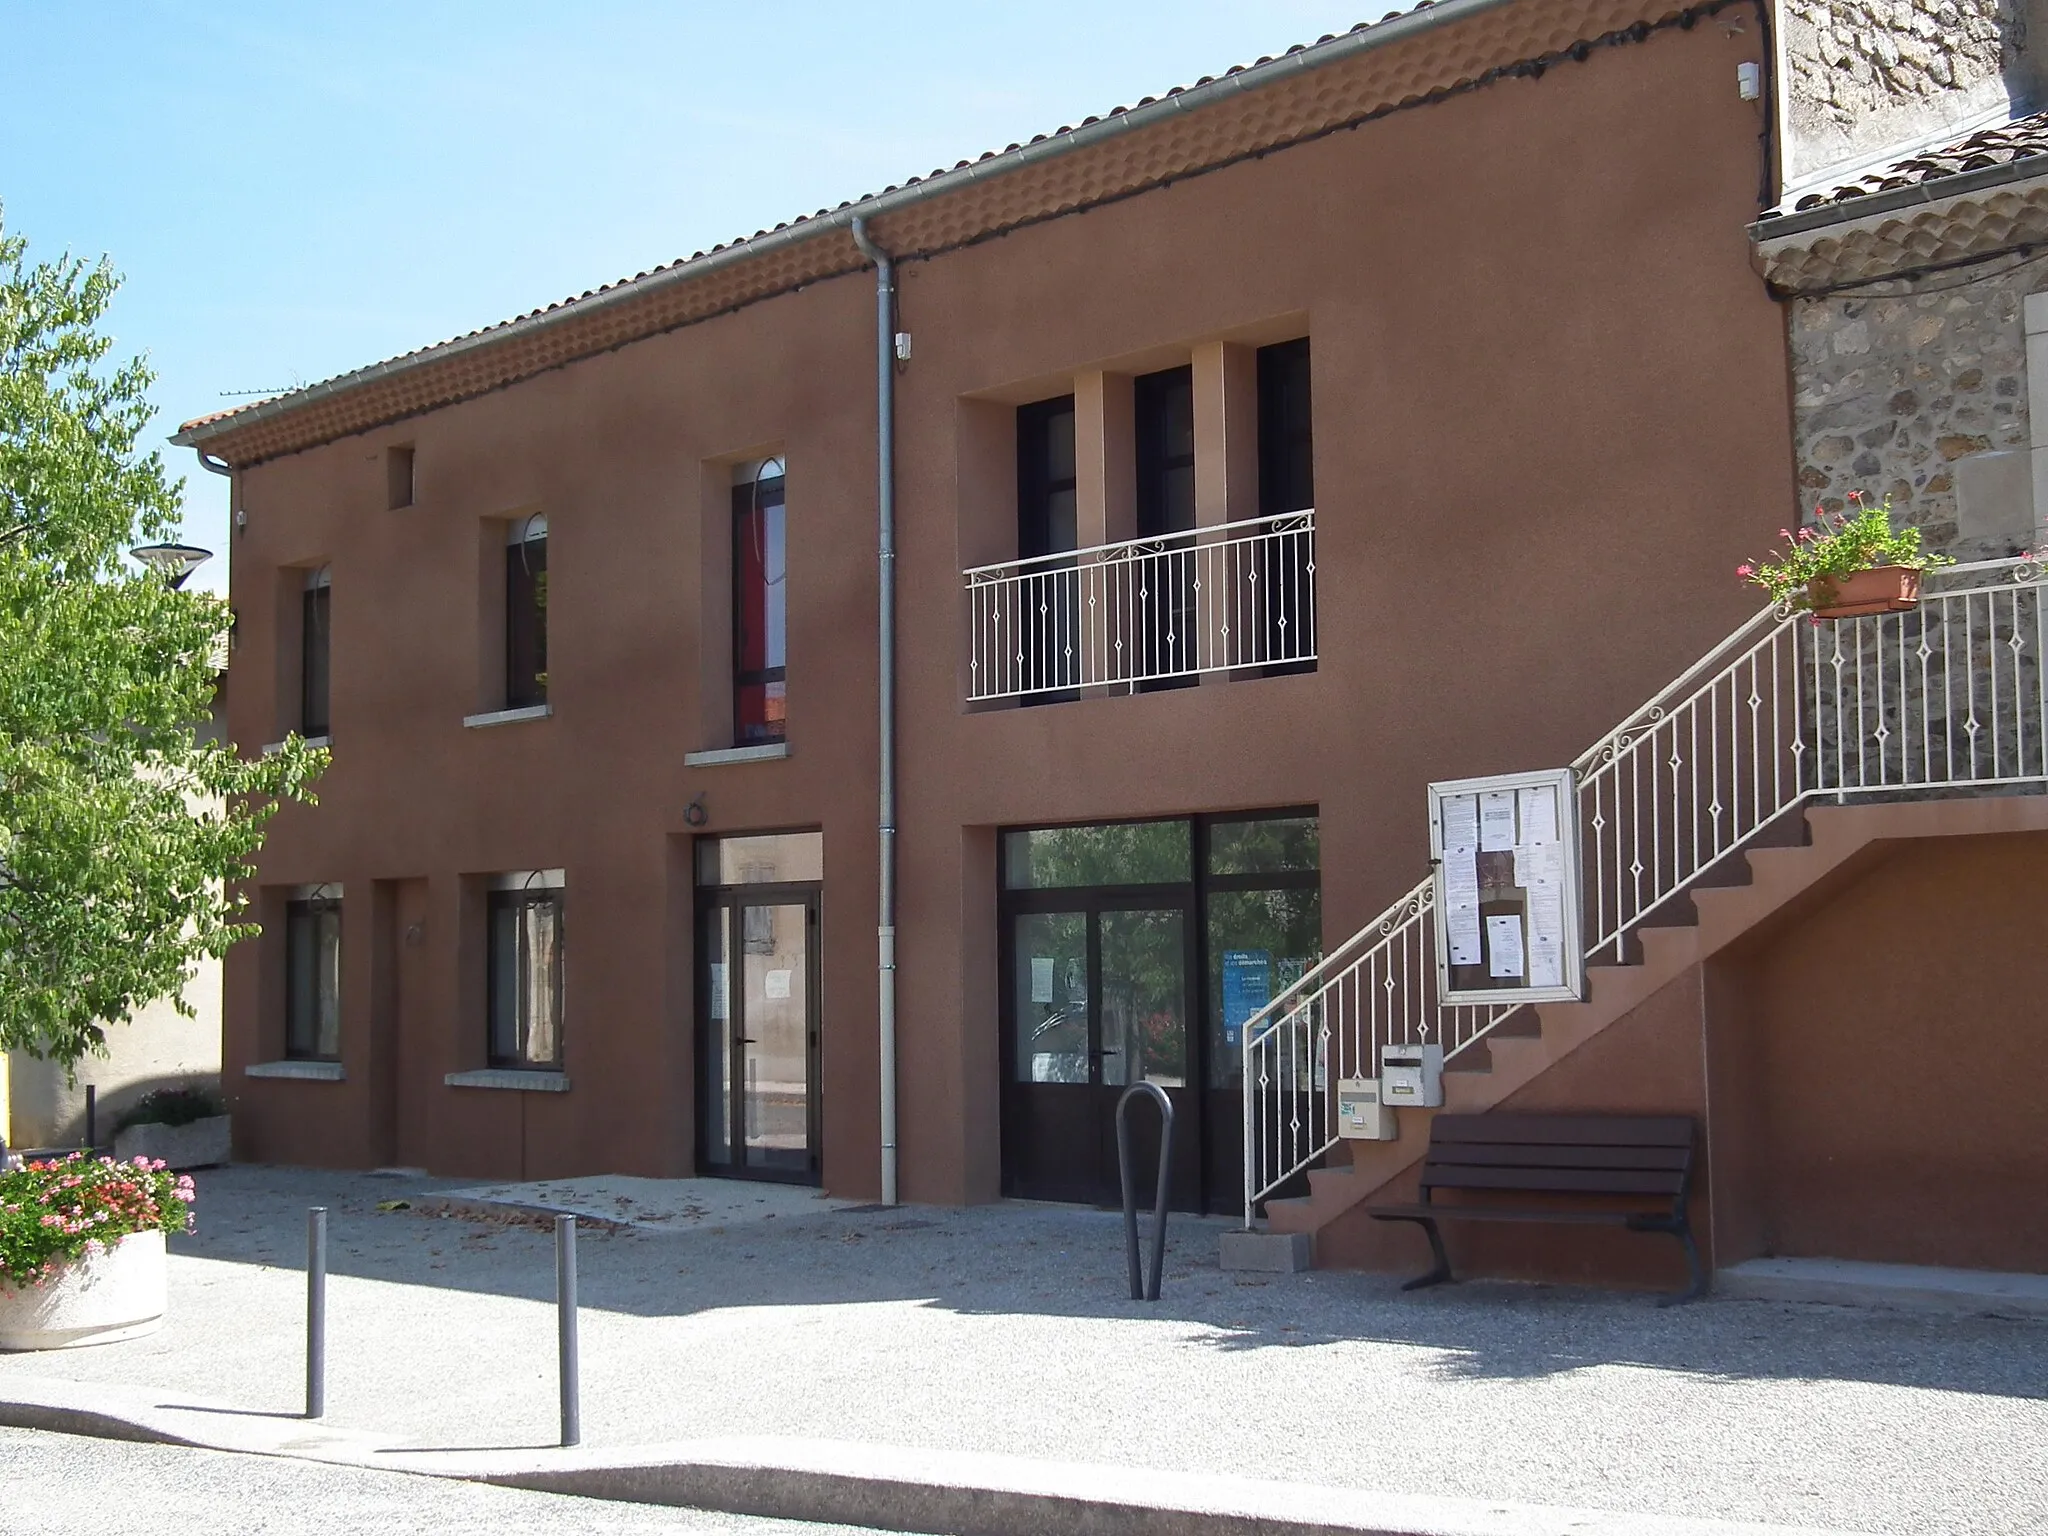 Photo showing: Town hall of Vion - Ardèche - France